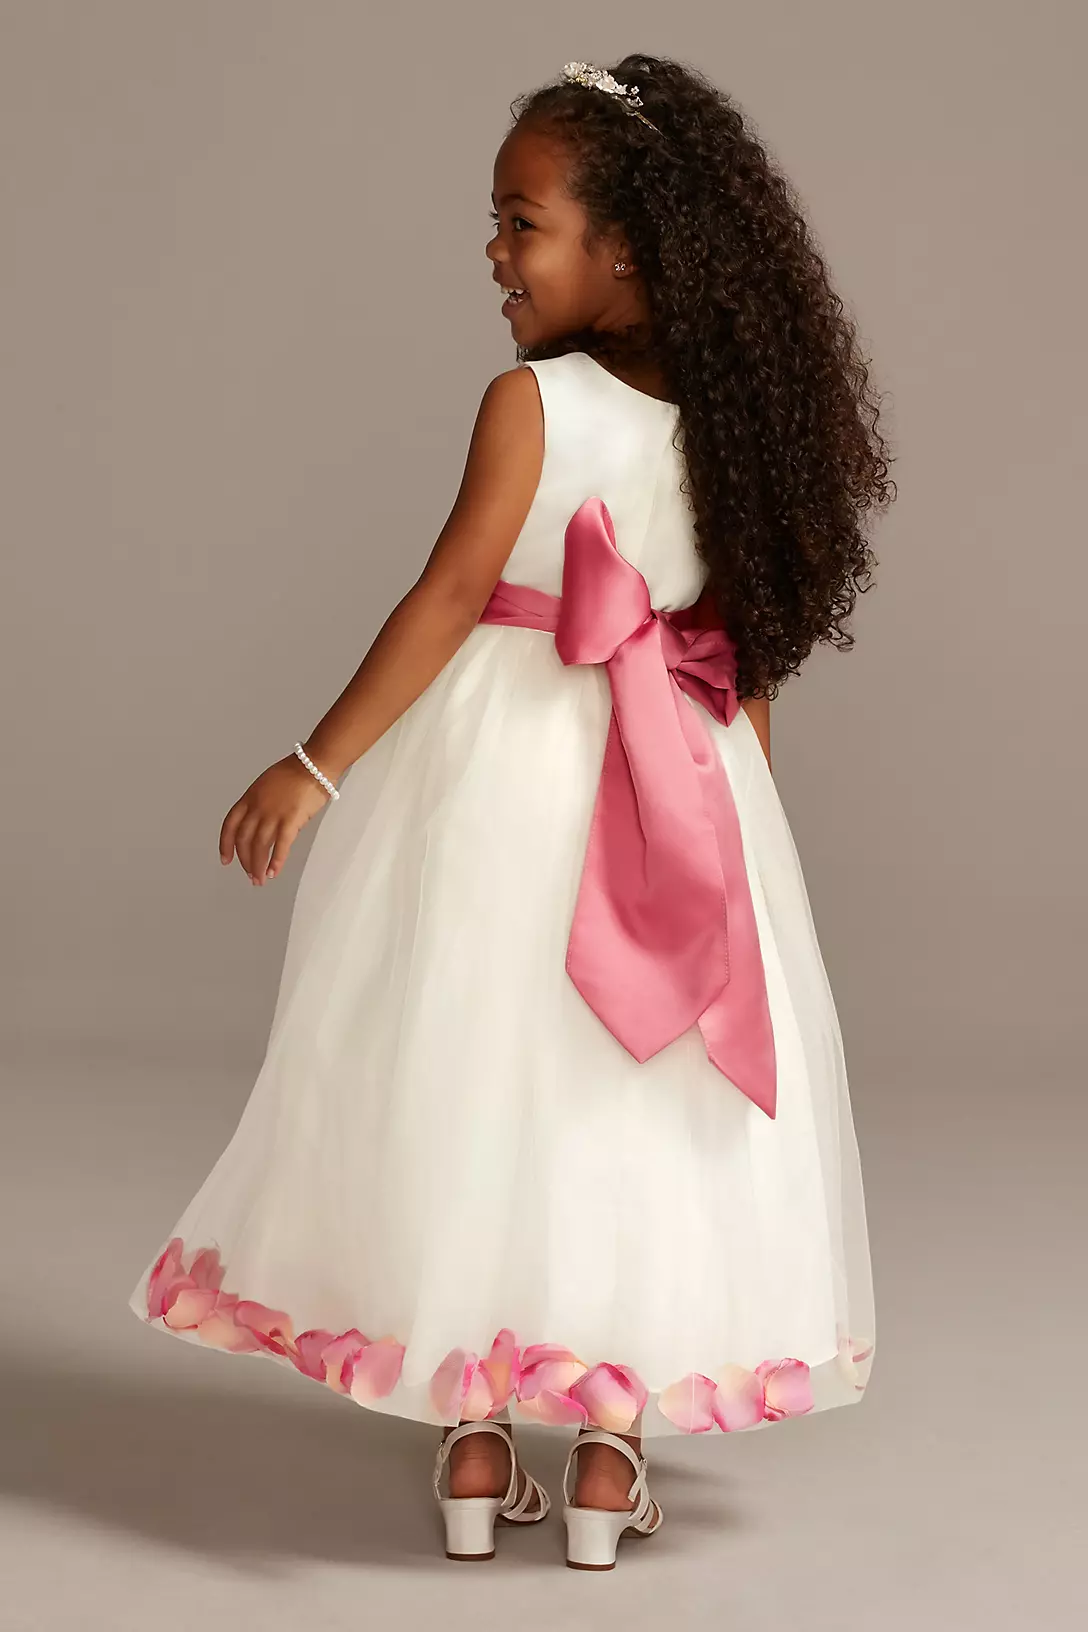 Tulle Skirt Flower Girl Dress with Colored Petals Image 2